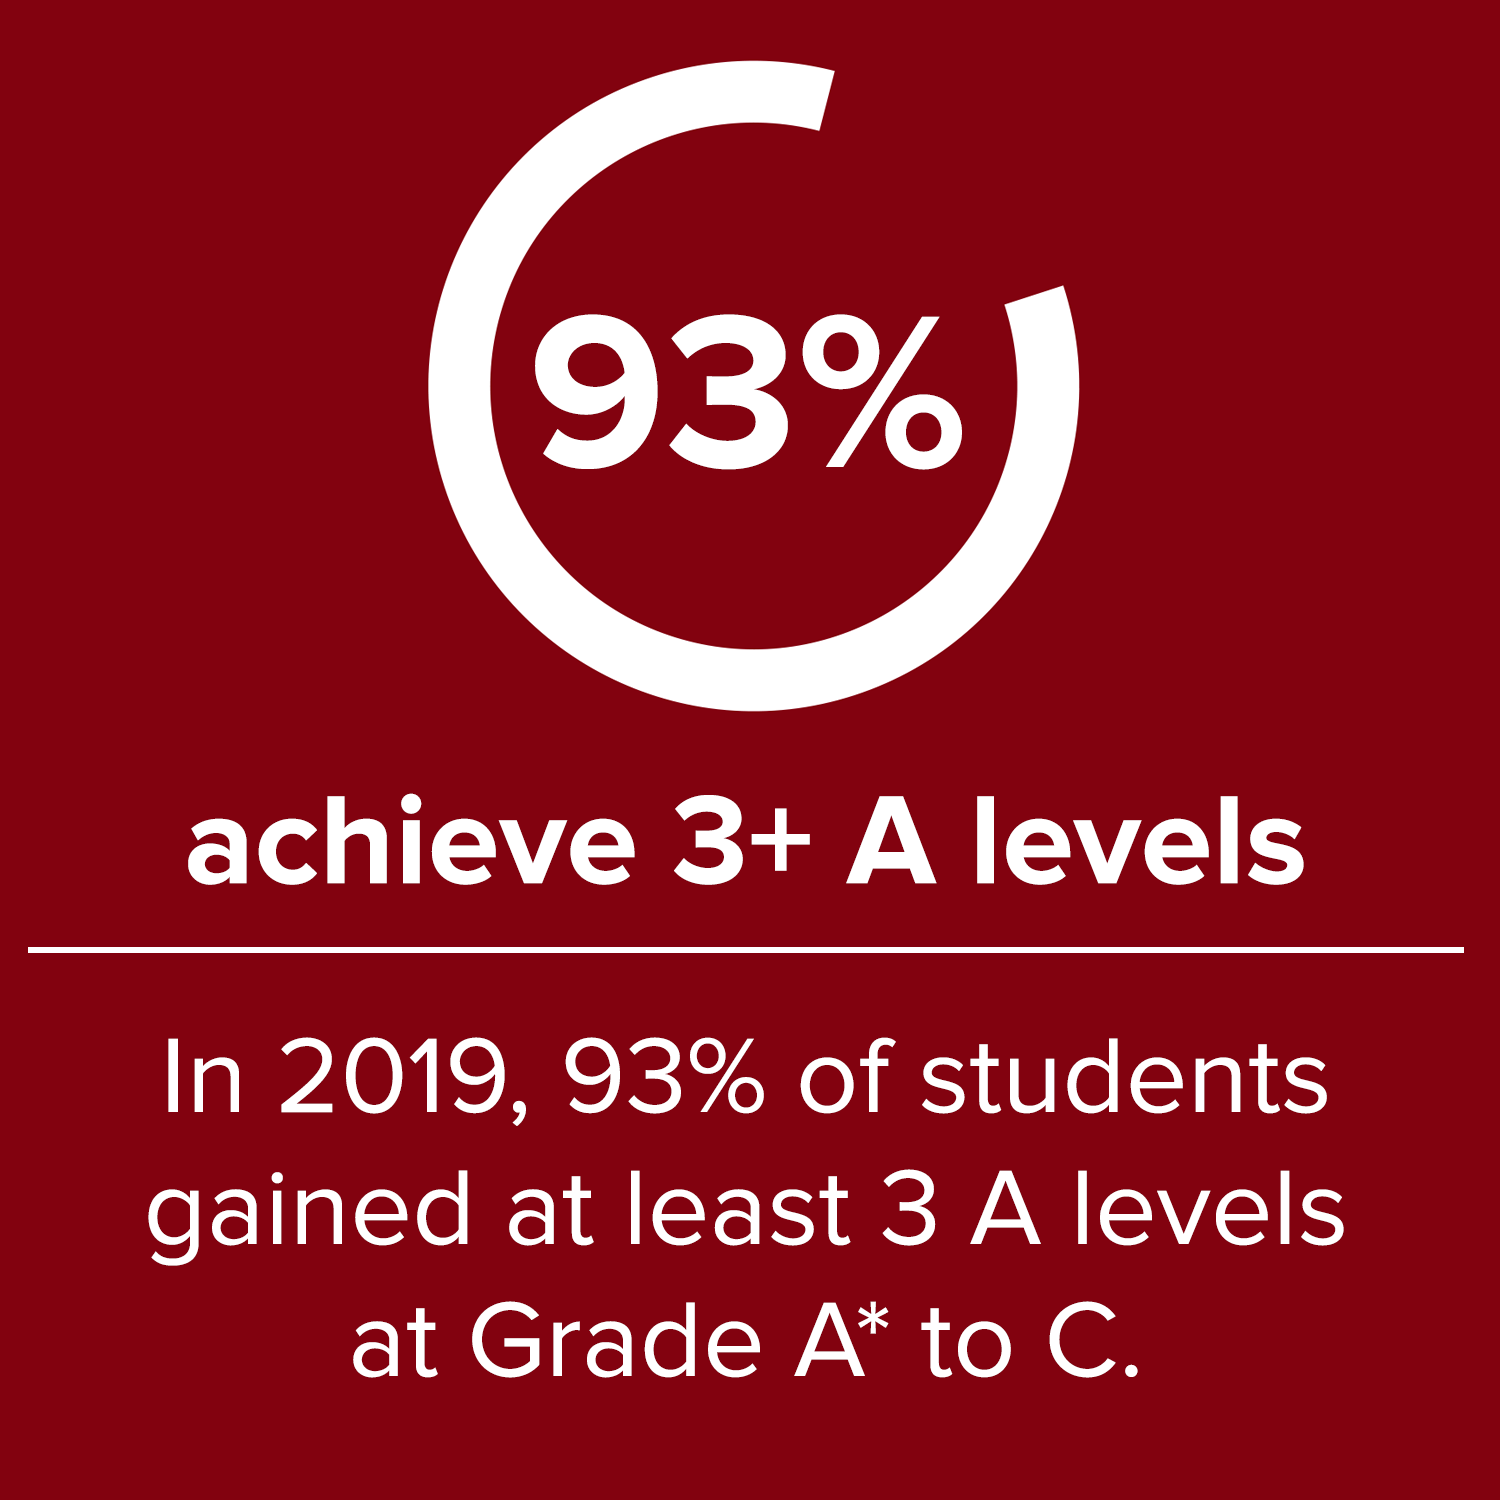 93% achieve 3 or more A levels